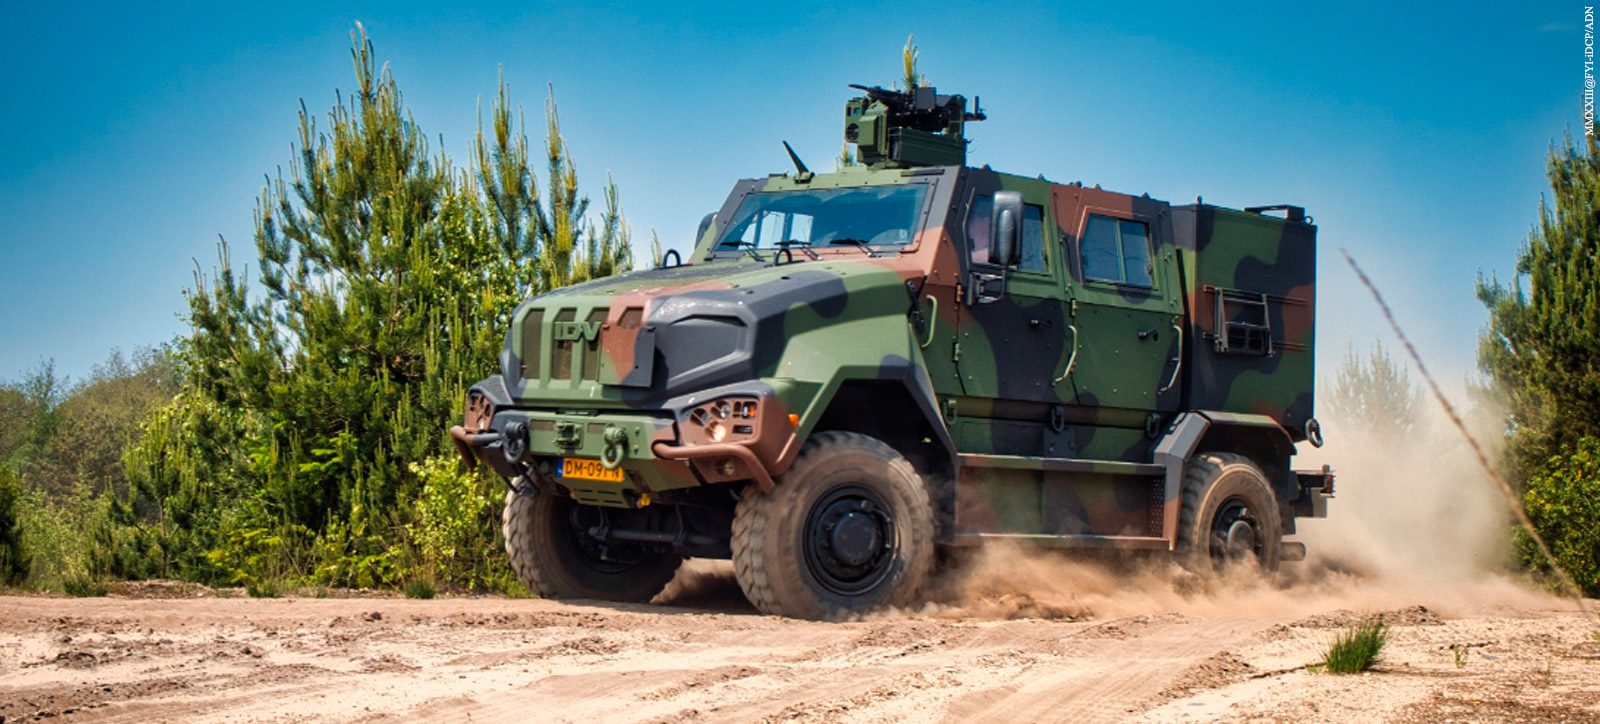 IDV delivers the first MTV “12kN” vehicle to the Dutch Armed Forces